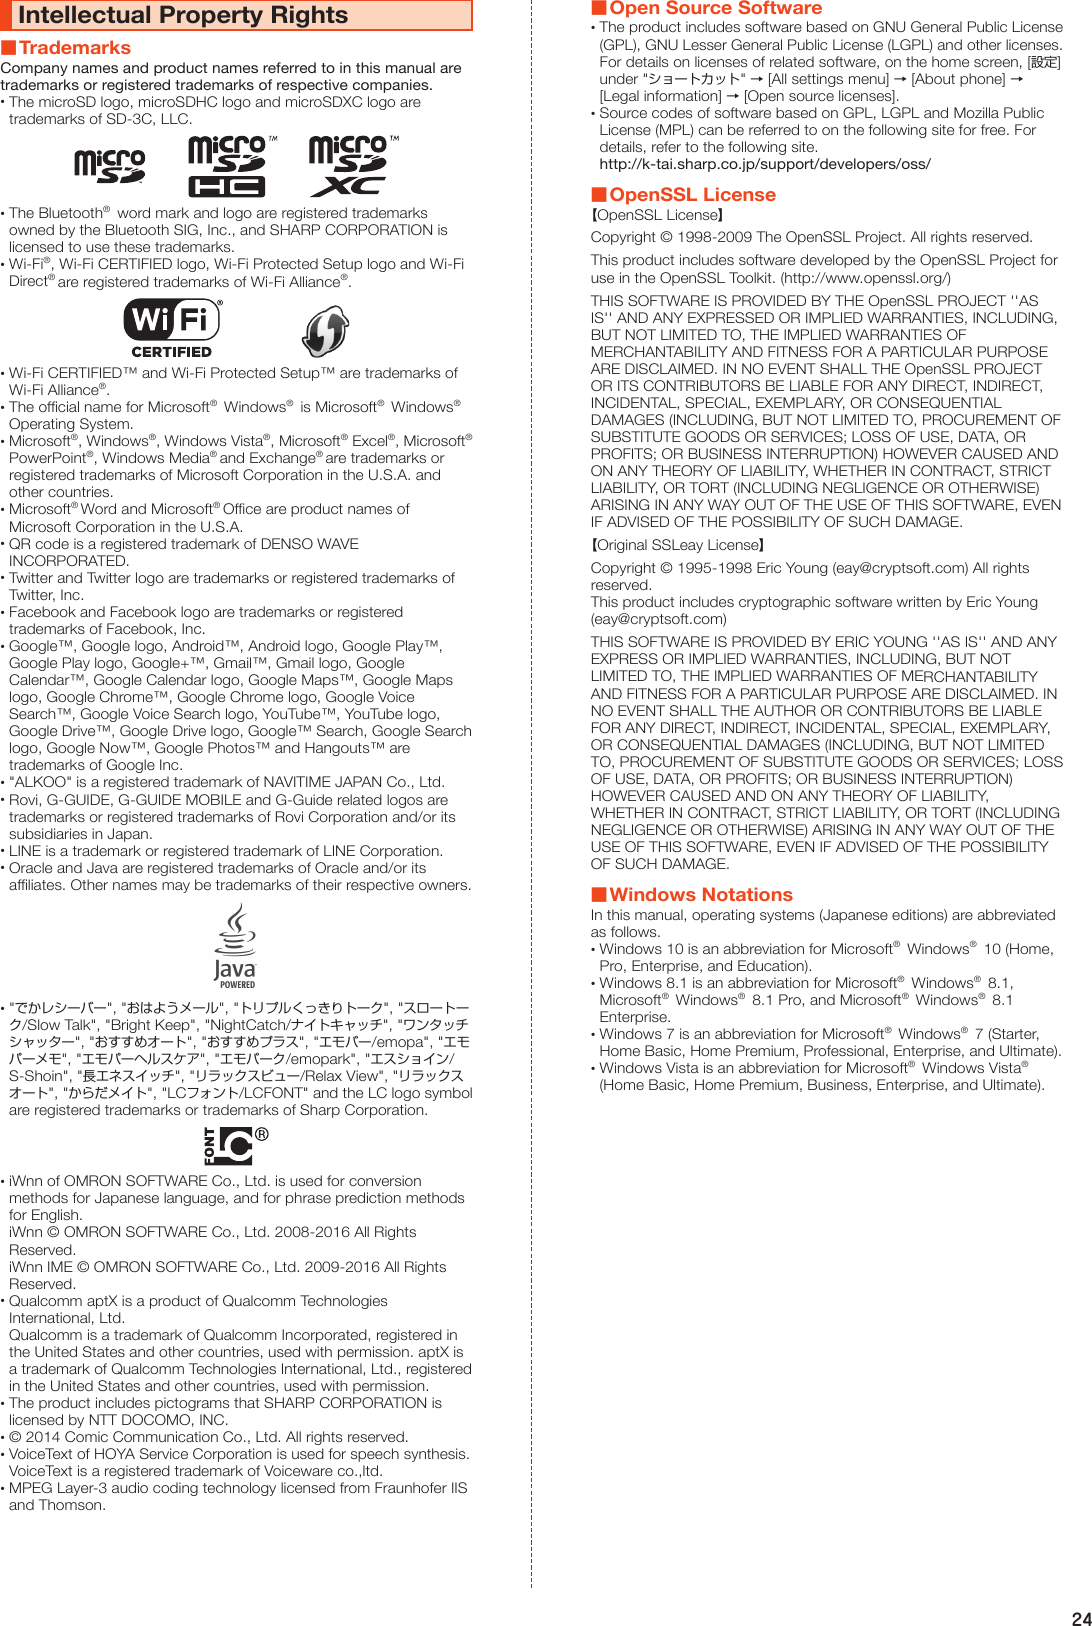 24Intellectual Property Rights ■TrademarksCompany names and product names referred to in this manual are trademarks or registered trademarks of respective companies. •The microSD logo, microSDHC logo and microSDXC logo are trademarks of SD-3C, LLC. •The Bluetooth®  word mark and logo are registered trademarks owned by the Bluetooth SIG, Inc., and SHARP CORPORATION is licensed to use these trademarks. •Wi-Fi®, Wi-Fi CERTIFIED logo, Wi-Fi Protected Setup logo and Wi-Fi Direct® are registered trademarks of Wi-Fi Alliance®.　　　　　　 •Wi-Fi CERTIFIED™ and Wi-Fi Protected Setup™ are trademarks of Wi-Fi Alliance®. •The official name for Microsoft®  Windows®  is Microsoft®  Windows®  Operating System. •Microsoft®, Windows®, Windows Vista®, Microsoft® Excel®, Microsoft®  PowerPoint®, Windows Media® and Exchange® are trademarks or registered trademarks of Microsoft Corporation in the U.S.A. and other countries. •Microsoft® Word and Microsoft® Office are product names of Microsoft Corporation in the U.S.A. •QR code is a registered trademark of DENSO WAVE INCORPORATED. •Twitter and Twitter logo are trademarks or registered trademarks of Twitter, Inc. •Facebook and Facebook logo are trademarks or registered trademarks of Facebook, Inc. •Google™, Google logo, Android™, Android logo, Google Play™, Google Play logo, Google+™, Gmail™, Gmail logo, Google Calendar™, Google Calendar logo, Google Maps™, Google Maps logo, Google Chrome™, Google Chrome logo, Google Voice Search™, Google Voice Search logo, YouTube™, YouTube logo, Google Drive™, Google Drive logo, Google™ Search, Google Search logo, Google Now™, Google Photos™ and Hangouts™ are trademarks of Google Inc. •&quot;ALKOO&quot; is a registered trademark of NAVITIME JAPAN Co., Ltd. •Rovi, G-GUIDE, G-GUIDE MOBILE and G-Guide related logos are trademarks or registered trademarks of Rovi Corporation and/or its subsidiaries in Japan. •LINE is a trademark or registered trademark of LINE Corporation. •Oracle and Java are registered trademarks of Oracle and/or its affiliates. Other names may be trademarks of their respective owners. •&quot;でかレシーバー&quot;, &quot;おはようメール&quot;, &quot;トリプルくっきりトーク&quot;, &quot;スロートーク/Slow Talk&quot;, &quot;Bright Keep&quot;, &quot;NightCatch/ナイトキャッチ&quot;, &quot;ワンタッチシャッター&quot;, &quot;おすすめオート&quot;, &quot;おすすめプラス&quot;, &quot;エモパー/emopa&quot;, &quot;エモパーメモ&quot;, &quot;エモパーヘルスケア&quot;, &quot;エモパーク/emopark&quot;, &quot;エスショイン/S-Shoin&quot;, &quot;長エネスイッチ&quot;, &quot;リラックスビュー/Relax View&quot;, &quot;リラックスオート&quot;, &quot;からだメイト&quot;, &quot;LCフォント/LCFONT&quot; and the LC logo symbol are registered trademarks or trademarks of Sharp Corporation. •iWnn of OMRON SOFTWARE Co., Ltd. is used for conversion methods for Japanese language, and for phrase prediction methods for English. iWnn © OMRON SOFTWARE Co., Ltd. 2008-2016 All Rights Reserved. iWnn IME © OMRON SOFTWARE Co., Ltd. 2009-2016 All Rights Reserved. •Qualcomm aptX is a product of Qualcomm Technologies International, Ltd. Qualcomm is a trademark of Qualcomm Incorporated, registered in the United States and other countries, used with permission. aptX is a trademark of Qualcomm Technologies International, Ltd., registered in the United States and other countries, used with permission. •The product includes pictograms that SHARP CORPORATION is licensed by NTT DOCOMO, INC. •© 2014 Comic Communication Co., Ltd. All rights reserved. •VoiceText of HOYA Service Corporation is used for speech synthesis. VoiceText is a registered trademark of Voiceware co.,ltd. •MPEG Layer-3 audio coding technology licensed from Fraunhofer IIS and Thomson. ■Open Source Software •The product includes software based on GNU General Public License (GPL), GNU Lesser General Public License (LGPL) and other licenses. For details on licenses of related software, on the home screen, [設定] under &quot;ショートカット&quot; → [All settings menu] → [About phone] → [Legal information] → [Open source licenses]. •Source codes of software based on GPL, LGPL and Mozilla Public License (MPL) can be referred to on the following site for free. For details, refer to the following site. http://k-tai.sharp.co.jp/support/developers/oss/ ■OpenSSL License【OpenSSL License】Copyright © 1998-2009 The OpenSSL Project. All rights reserved.This product includes software developed by the OpenSSL Project for use in the OpenSSL Toolkit. (http://www.openssl.org/)THIS SOFTWARE IS PROVIDED BY THE OpenSSL PROJECT &apos;&apos;AS IS&apos;&apos; AND ANY EXPRESSED OR IMPLIED WARRANTIES, INCLUDING, BUT NOT LIMITED TO, THE IMPLIED WARRANTIES OF MERCHANTABILITY AND FITNESS FOR A PARTICULAR PURPOSE ARE DISCLAIMED. IN NO EVENT SHALL THE OpenSSL PROJECT OR ITS CONTRIBUTORS BE LIABLE FOR ANY DIRECT, INDIRECT, INCIDENTAL, SPECIAL, EXEMPLARY, OR CONSEQUENTIAL DAMAGES (INCLUDING, BUT NOT LIMITED TO, PROCUREMENT OF SUBSTITUTE GOODS OR SERVICES; LOSS OF USE, DATA, OR PROFITS; OR BUSINESS INTERRUPTION) HOWEVER CAUSED AND ON ANY THEORY OF LIABILITY, WHETHER IN CONTRACT, STRICT LIABILITY, OR TORT (INCLUDING NEGLIGENCE OR OTHERWISE) ARISING IN ANY WAY OUT OF THE USE OF THIS SOFTWARE, EVEN IF ADVISED OF THE POSSIBILITY OF SUCH DAMAGE.【Original SSLeay License】Copyright © 1995-1998 Eric Young (eay@cryptsoft.com) All rights reserved.This product includes cryptographic software written by Eric Young (eay@cryptsoft.com)THIS SOFTWARE IS PROVIDED BY ERIC YOUNG &apos;&apos;AS IS&apos;&apos; AND ANY EXPRESS OR IMPLIED WARRANTIES, INCLUDING, BUT NOT LIMITED TO, THE IMPLIED WARRANTIES OF MERCHANTABILITY AND FITNESS FOR A PARTICULAR PURPOSE ARE DISCLAIMED. IN NO EVENT SHALL THE AUTHOR OR CONTRIBUTORS BE LIABLE FOR ANY DIRECT, INDIRECT, INCIDENTAL, SPECIAL, EXEMPLARY, OR CONSEQUENTIAL DAMAGES (INCLUDING, BUT NOT LIMITED TO, PROCUREMENT OF SUBSTITUTE GOODS OR SERVICES; LOSS OF USE, DATA, OR PROFITS; OR BUSINESS INTERRUPTION) HOWEVER CAUSED AND ON ANY THEORY OF LIABILITY, WHETHER IN CONTRACT, STRICT LIABILITY, OR TORT (INCLUDING NEGLIGENCE OR OTHERWISE) ARISING IN ANY WAY OUT OF THE USE OF THIS SOFTWARE, EVEN IF ADVISED OF THE POSSIBILITY OF SUCH DAMAGE. ■Windows NotationsIn this manual, operating systems (Japanese editions) are abbreviated as follows. •Windows 10 is an abbreviation for Microsoft®  Windows®  10 (Home, Pro, Enterprise, and Education). •Windows 8.1 is an abbreviation for Microsoft®  Windows®  8.1, Microsoft®  Windows®  8.1 Pro, and Microsoft®  Windows®  8.1 Enterprise. •Windows 7 is an abbreviation for Microsoft®  Windows®  7 (Starter, Home Basic, Home Premium, Professional, Enterprise, and Ultimate). •Windows Vista is an abbreviation for Microsoft®  Windows Vista®  (Home Basic, Home Premium, Business, Enterprise, and Ultimate).